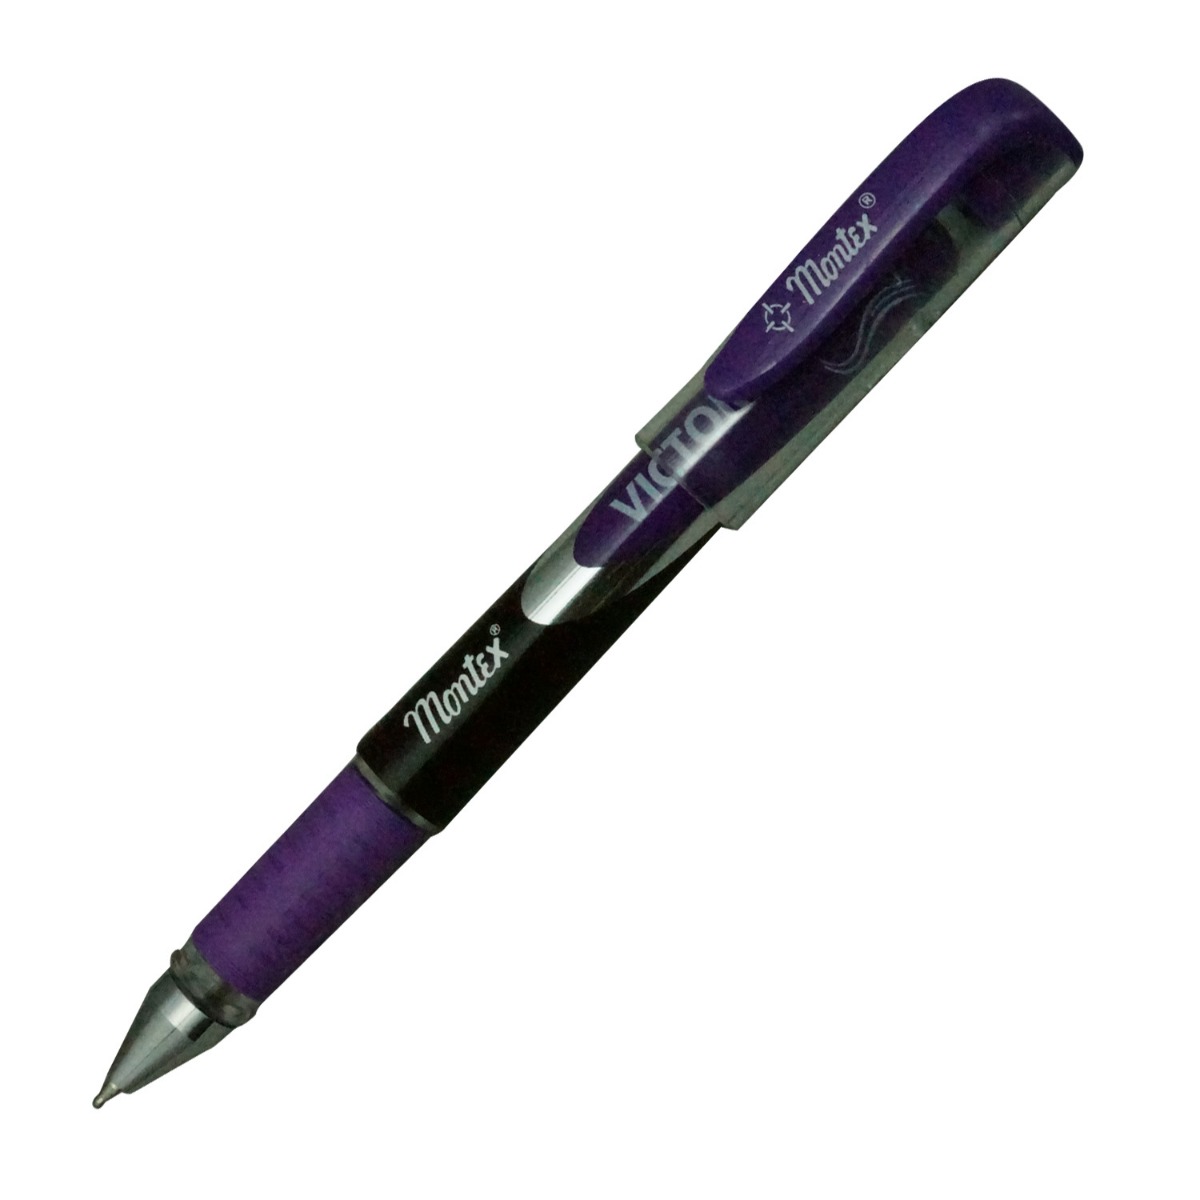 Montex Victory Model:16293 Vilote Color Body With Blue Writing Cap Type Ball Pen